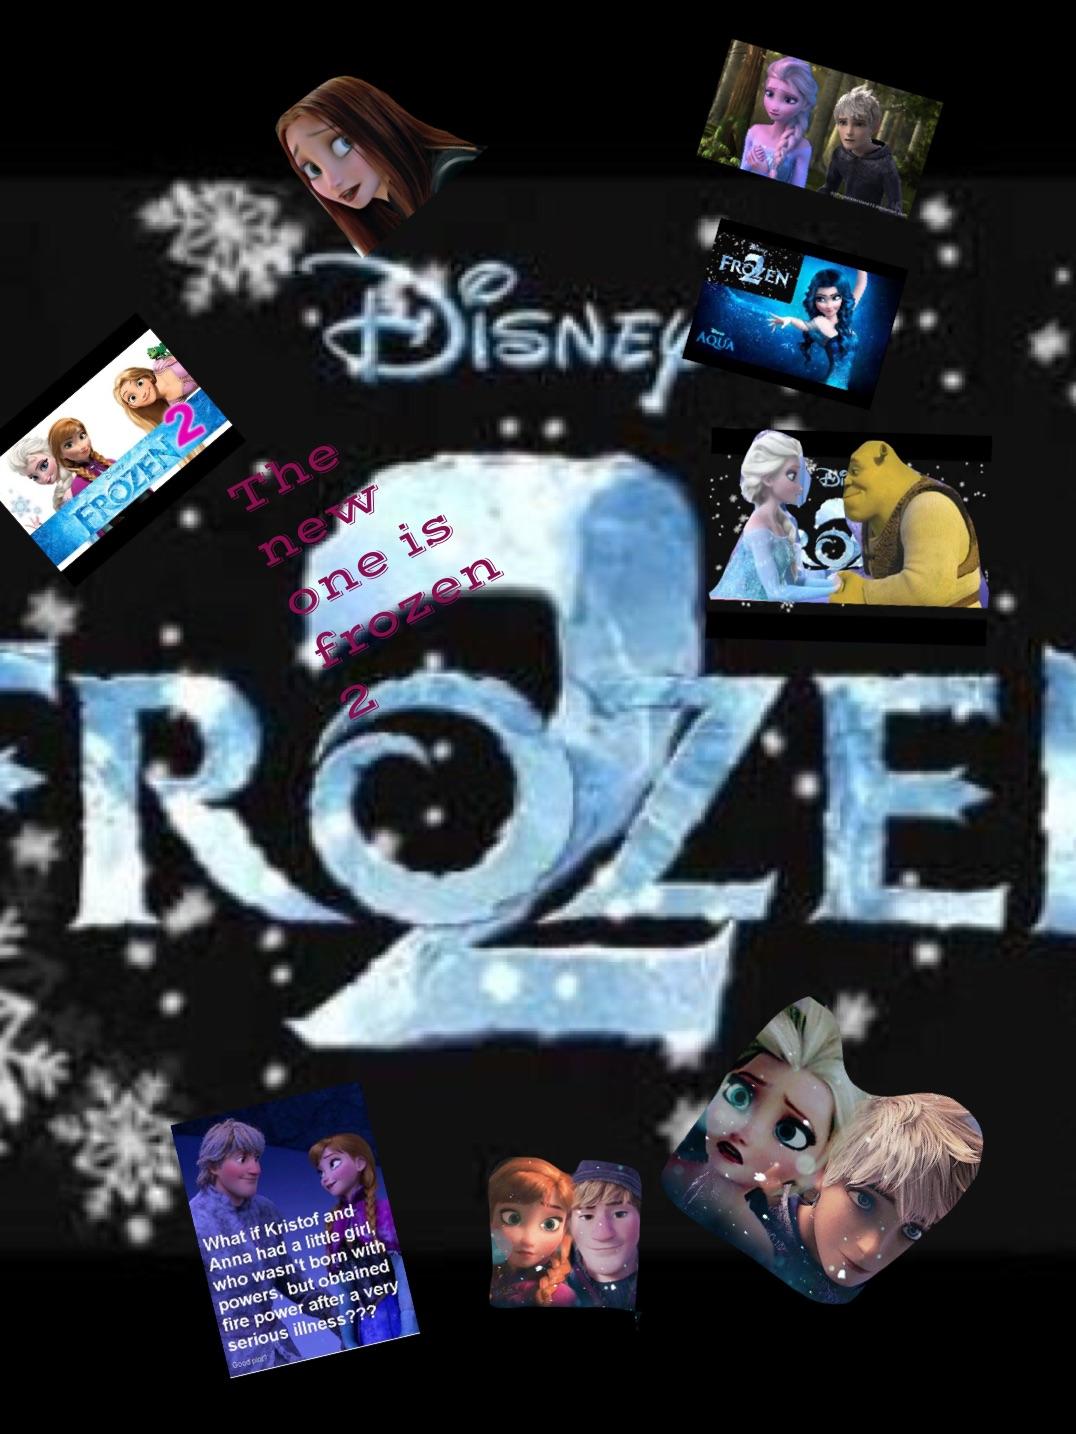 The new one is frozen 2